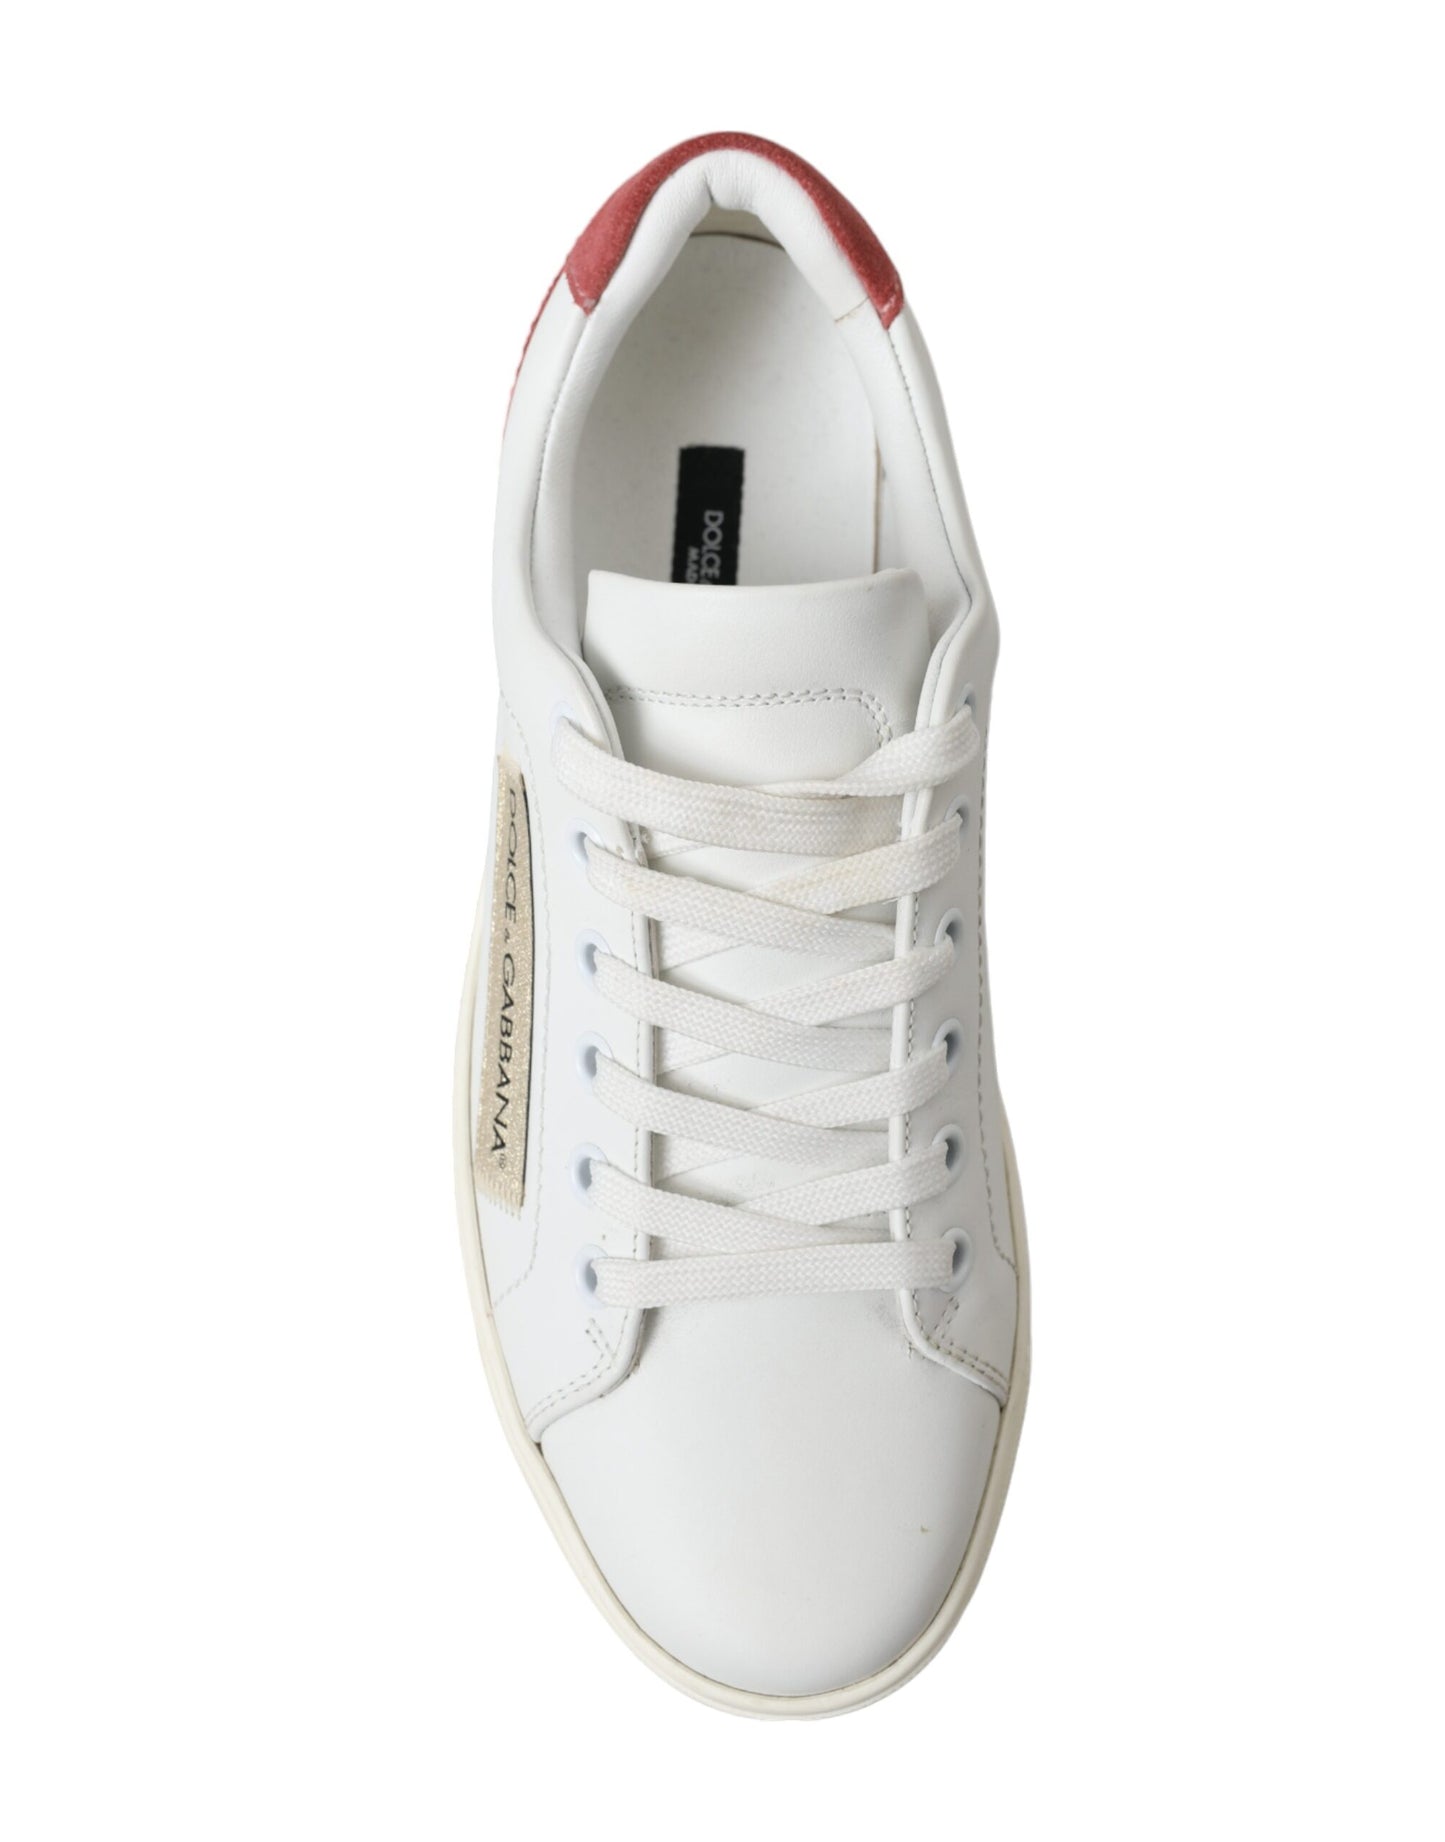 Dolce & Gabbana Elegant White and Pink Leather Sneakers